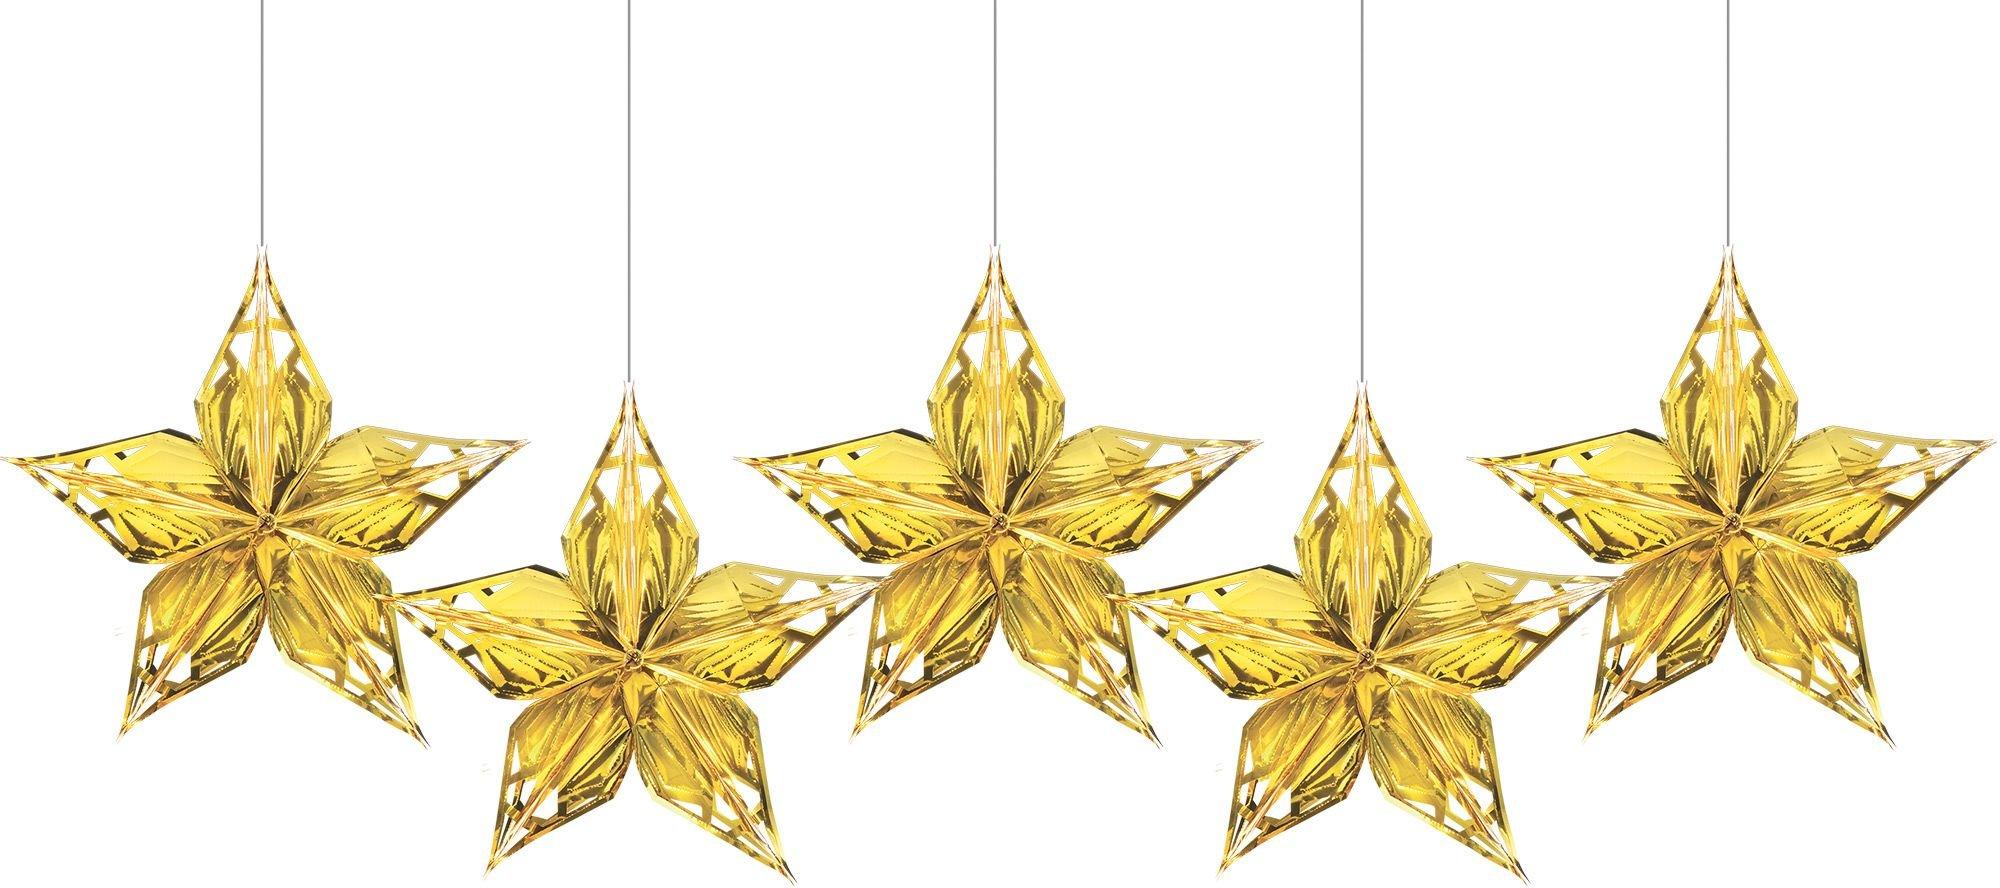 Metallic Gold Star Decorations 5ct | Party City